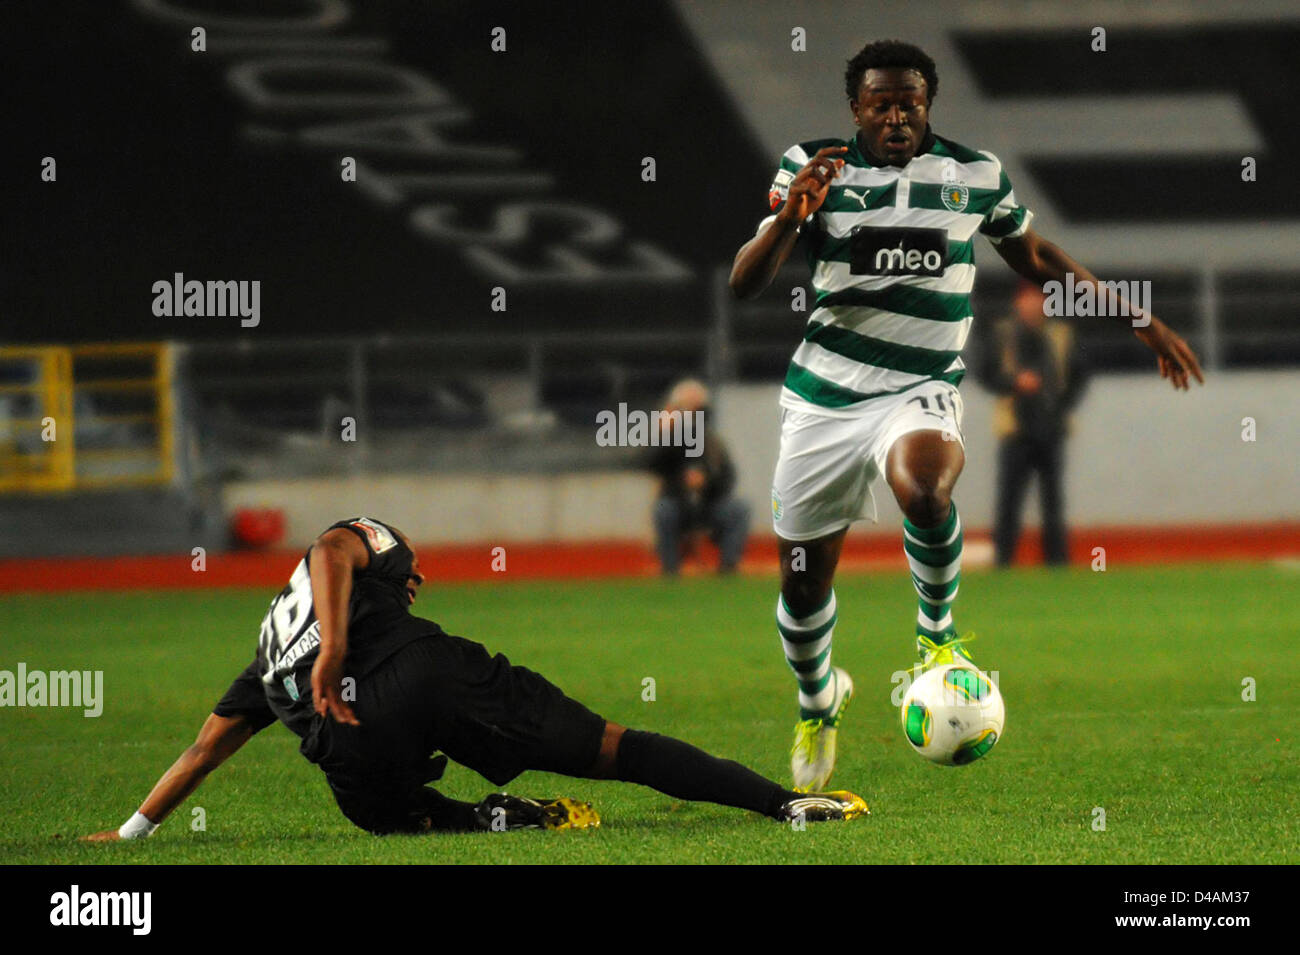 An Academica defender fails to tackle Sporting Clube de Portugal player Fokobo during a Portuguese football league match Stock Photo